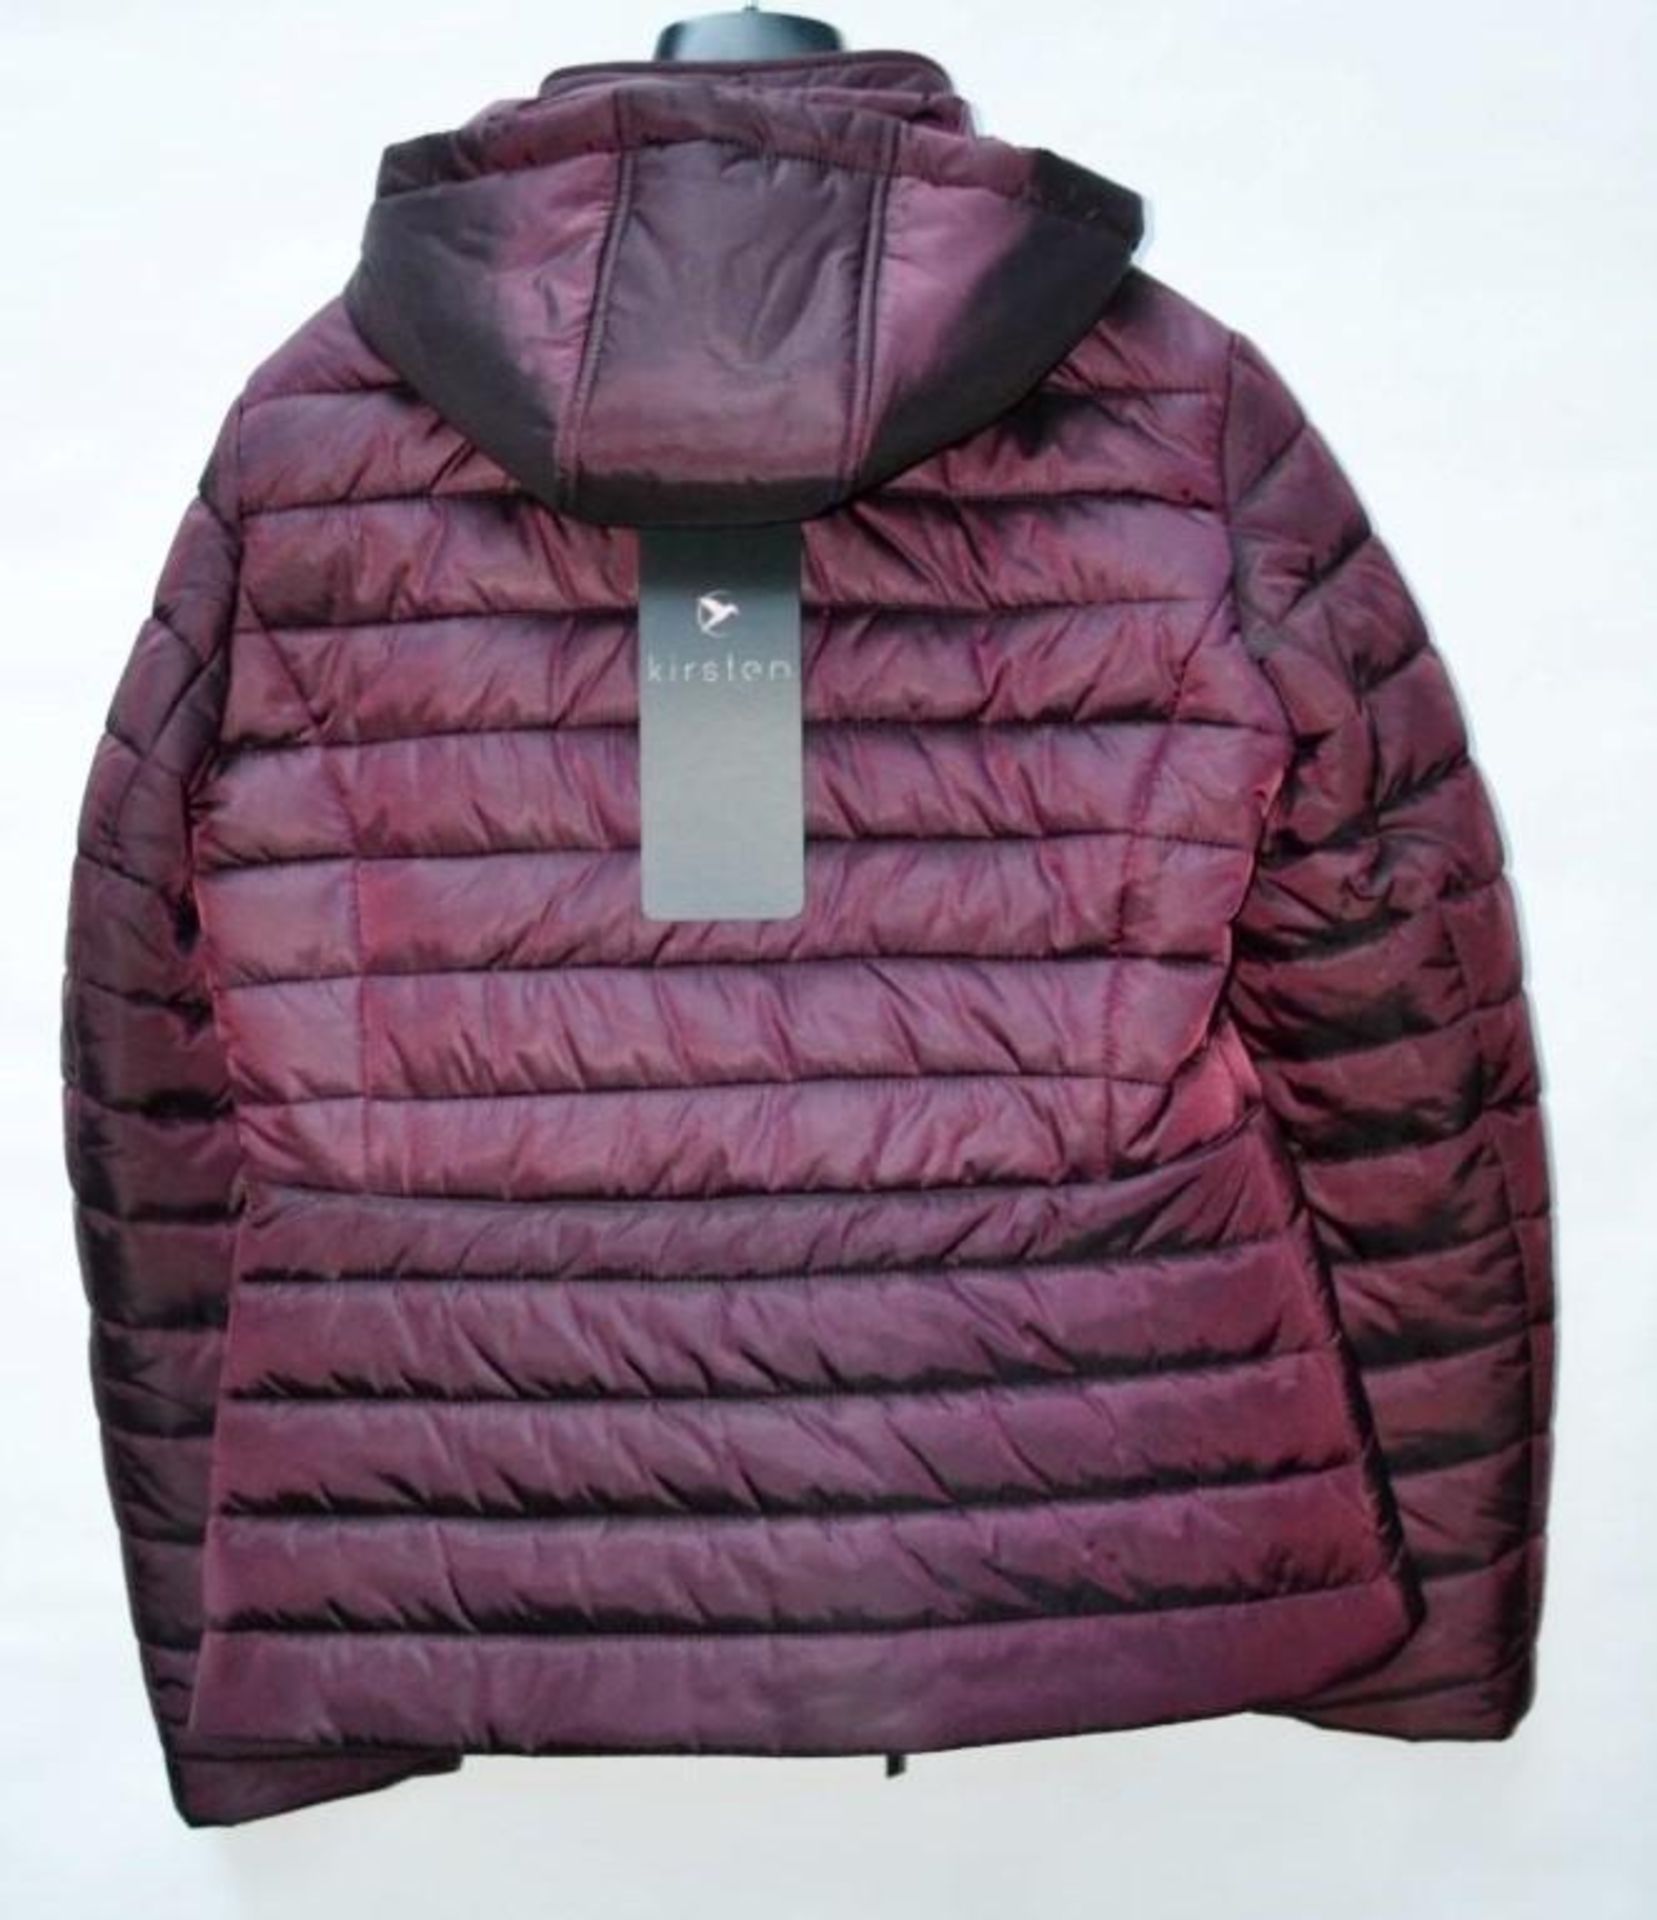 1 x Steilmann Kirsten Womens Padded Winter Coat - Features Removable Hood - Size 12 - Colour: Deep P - Image 3 of 3